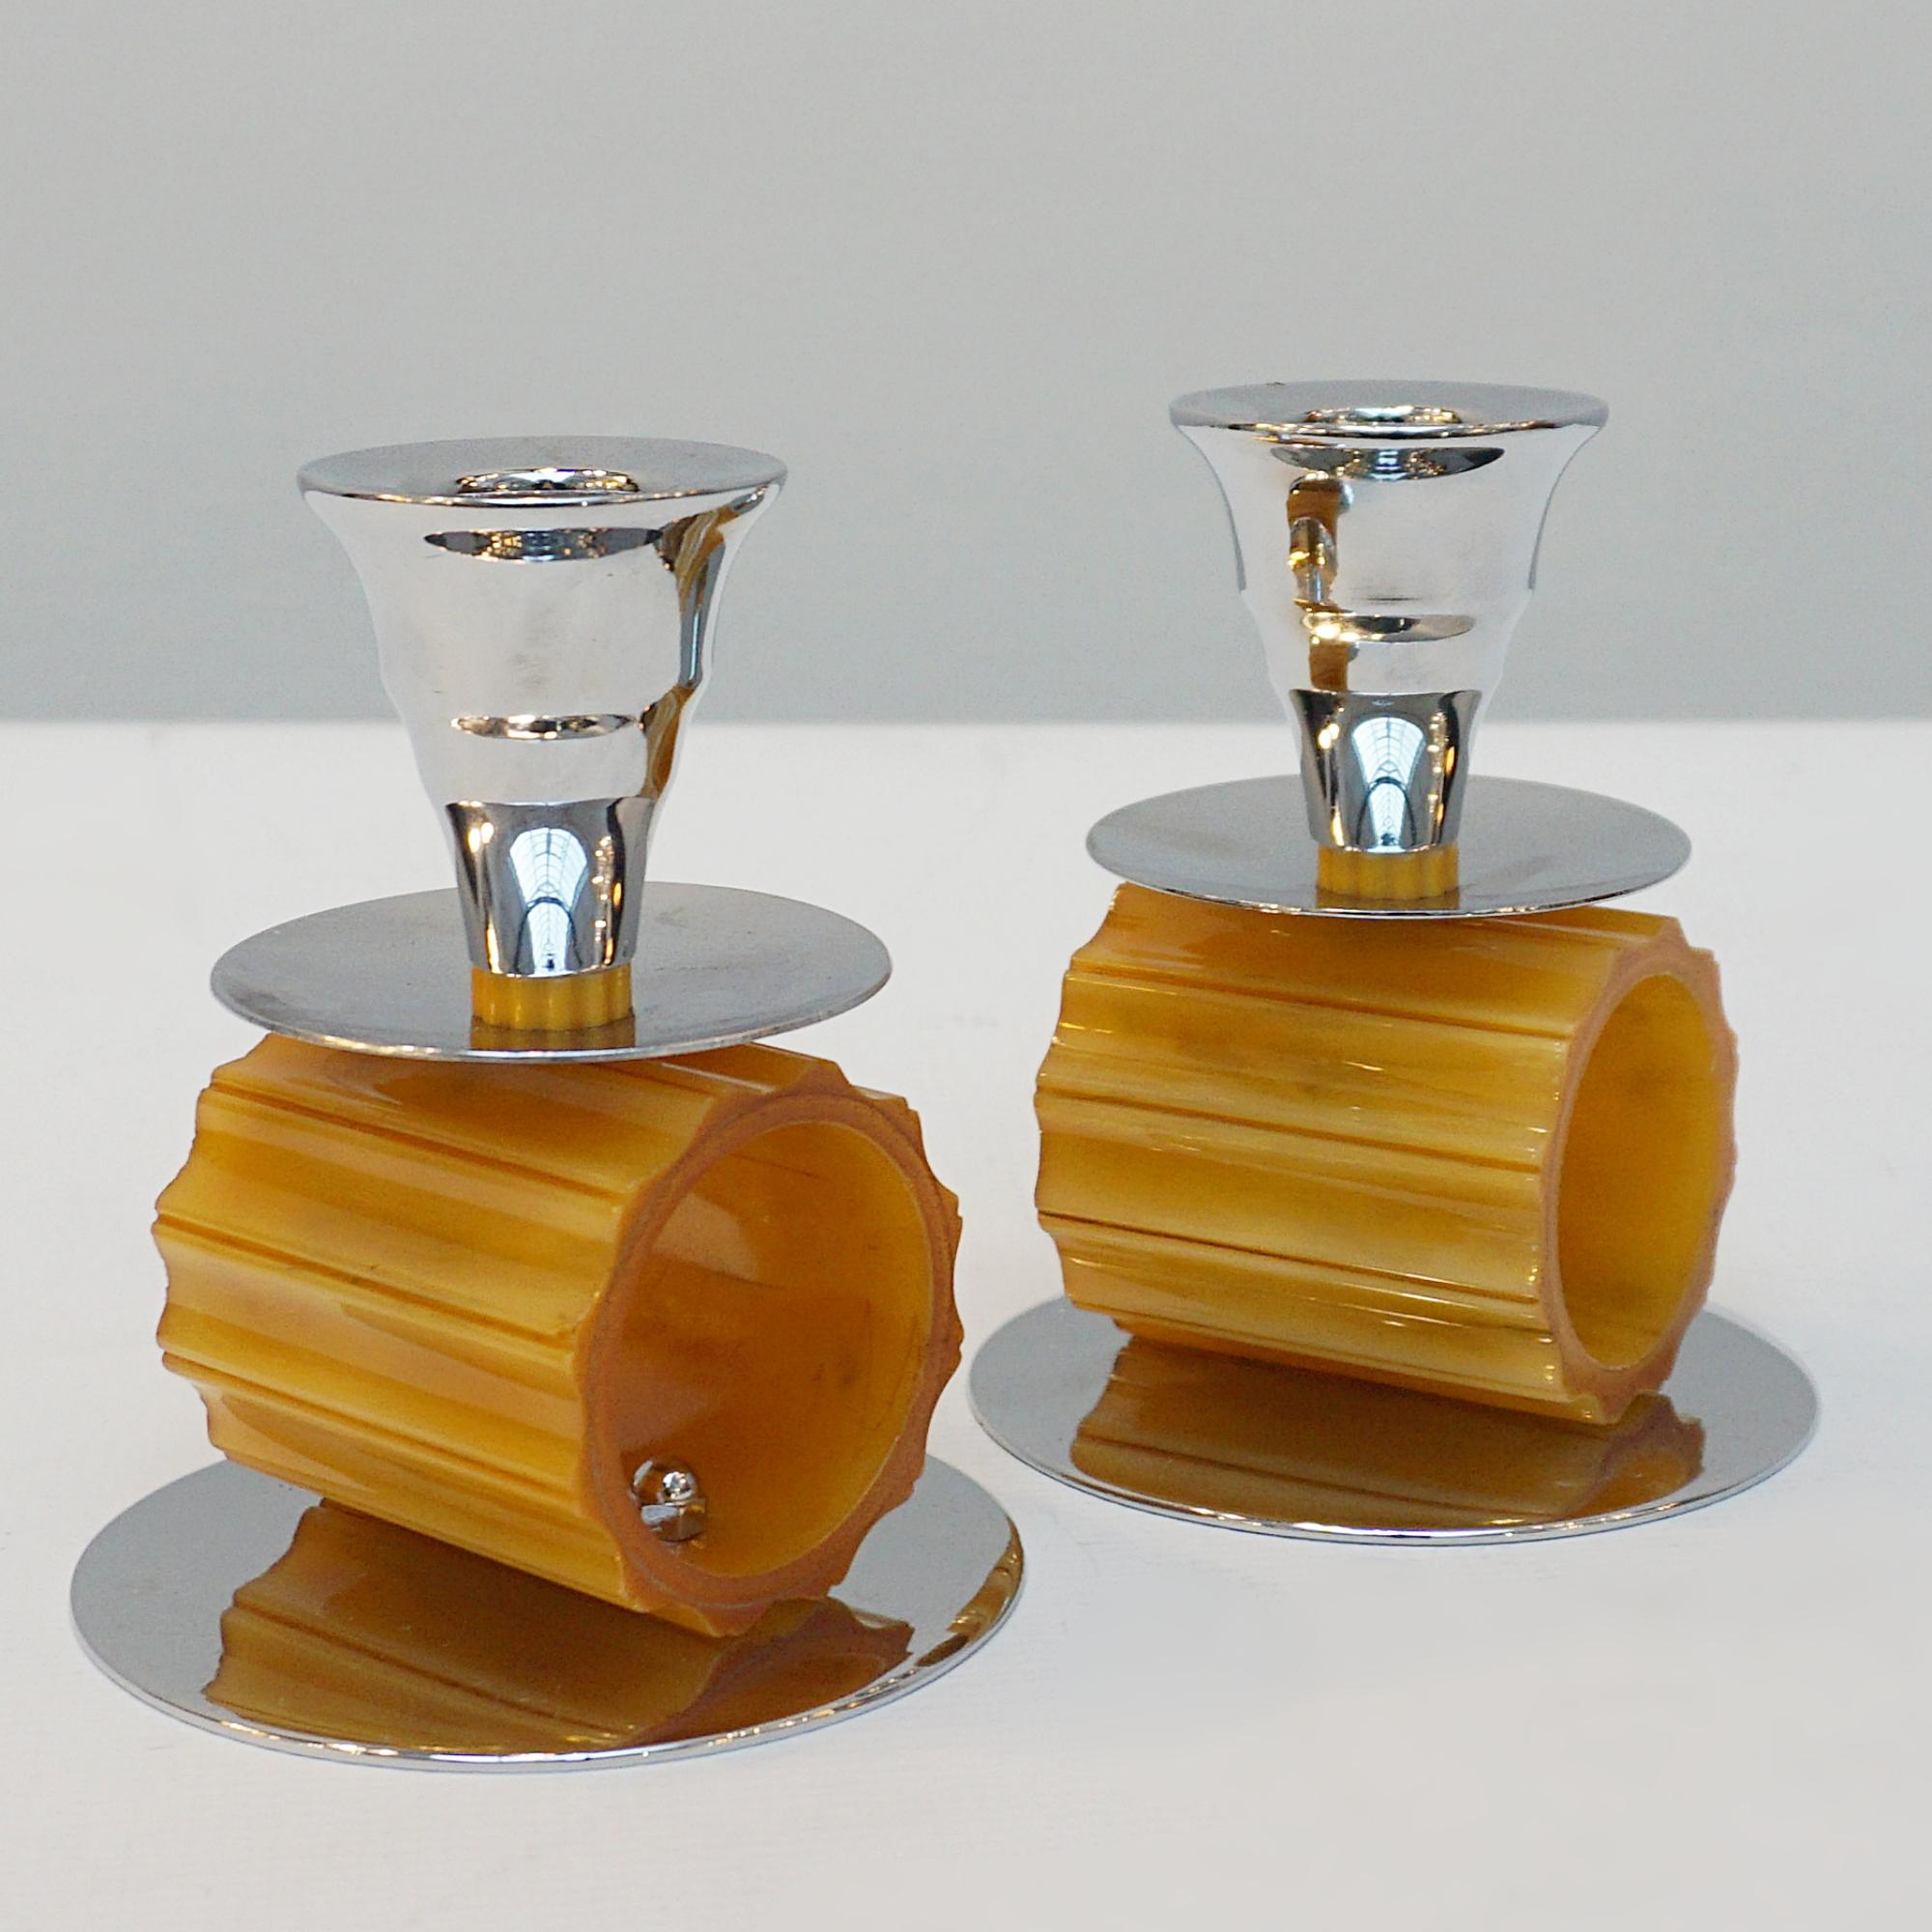 A pair of Art Deco style candlesticks. Amber bakelite cylindrical ridged stem. Set over a rounded chromed metal base.

Dimensions: H 11cm W 9cm

Origin: English

Item Number: 2212231

Re-chromed and polished with some replacement parts.